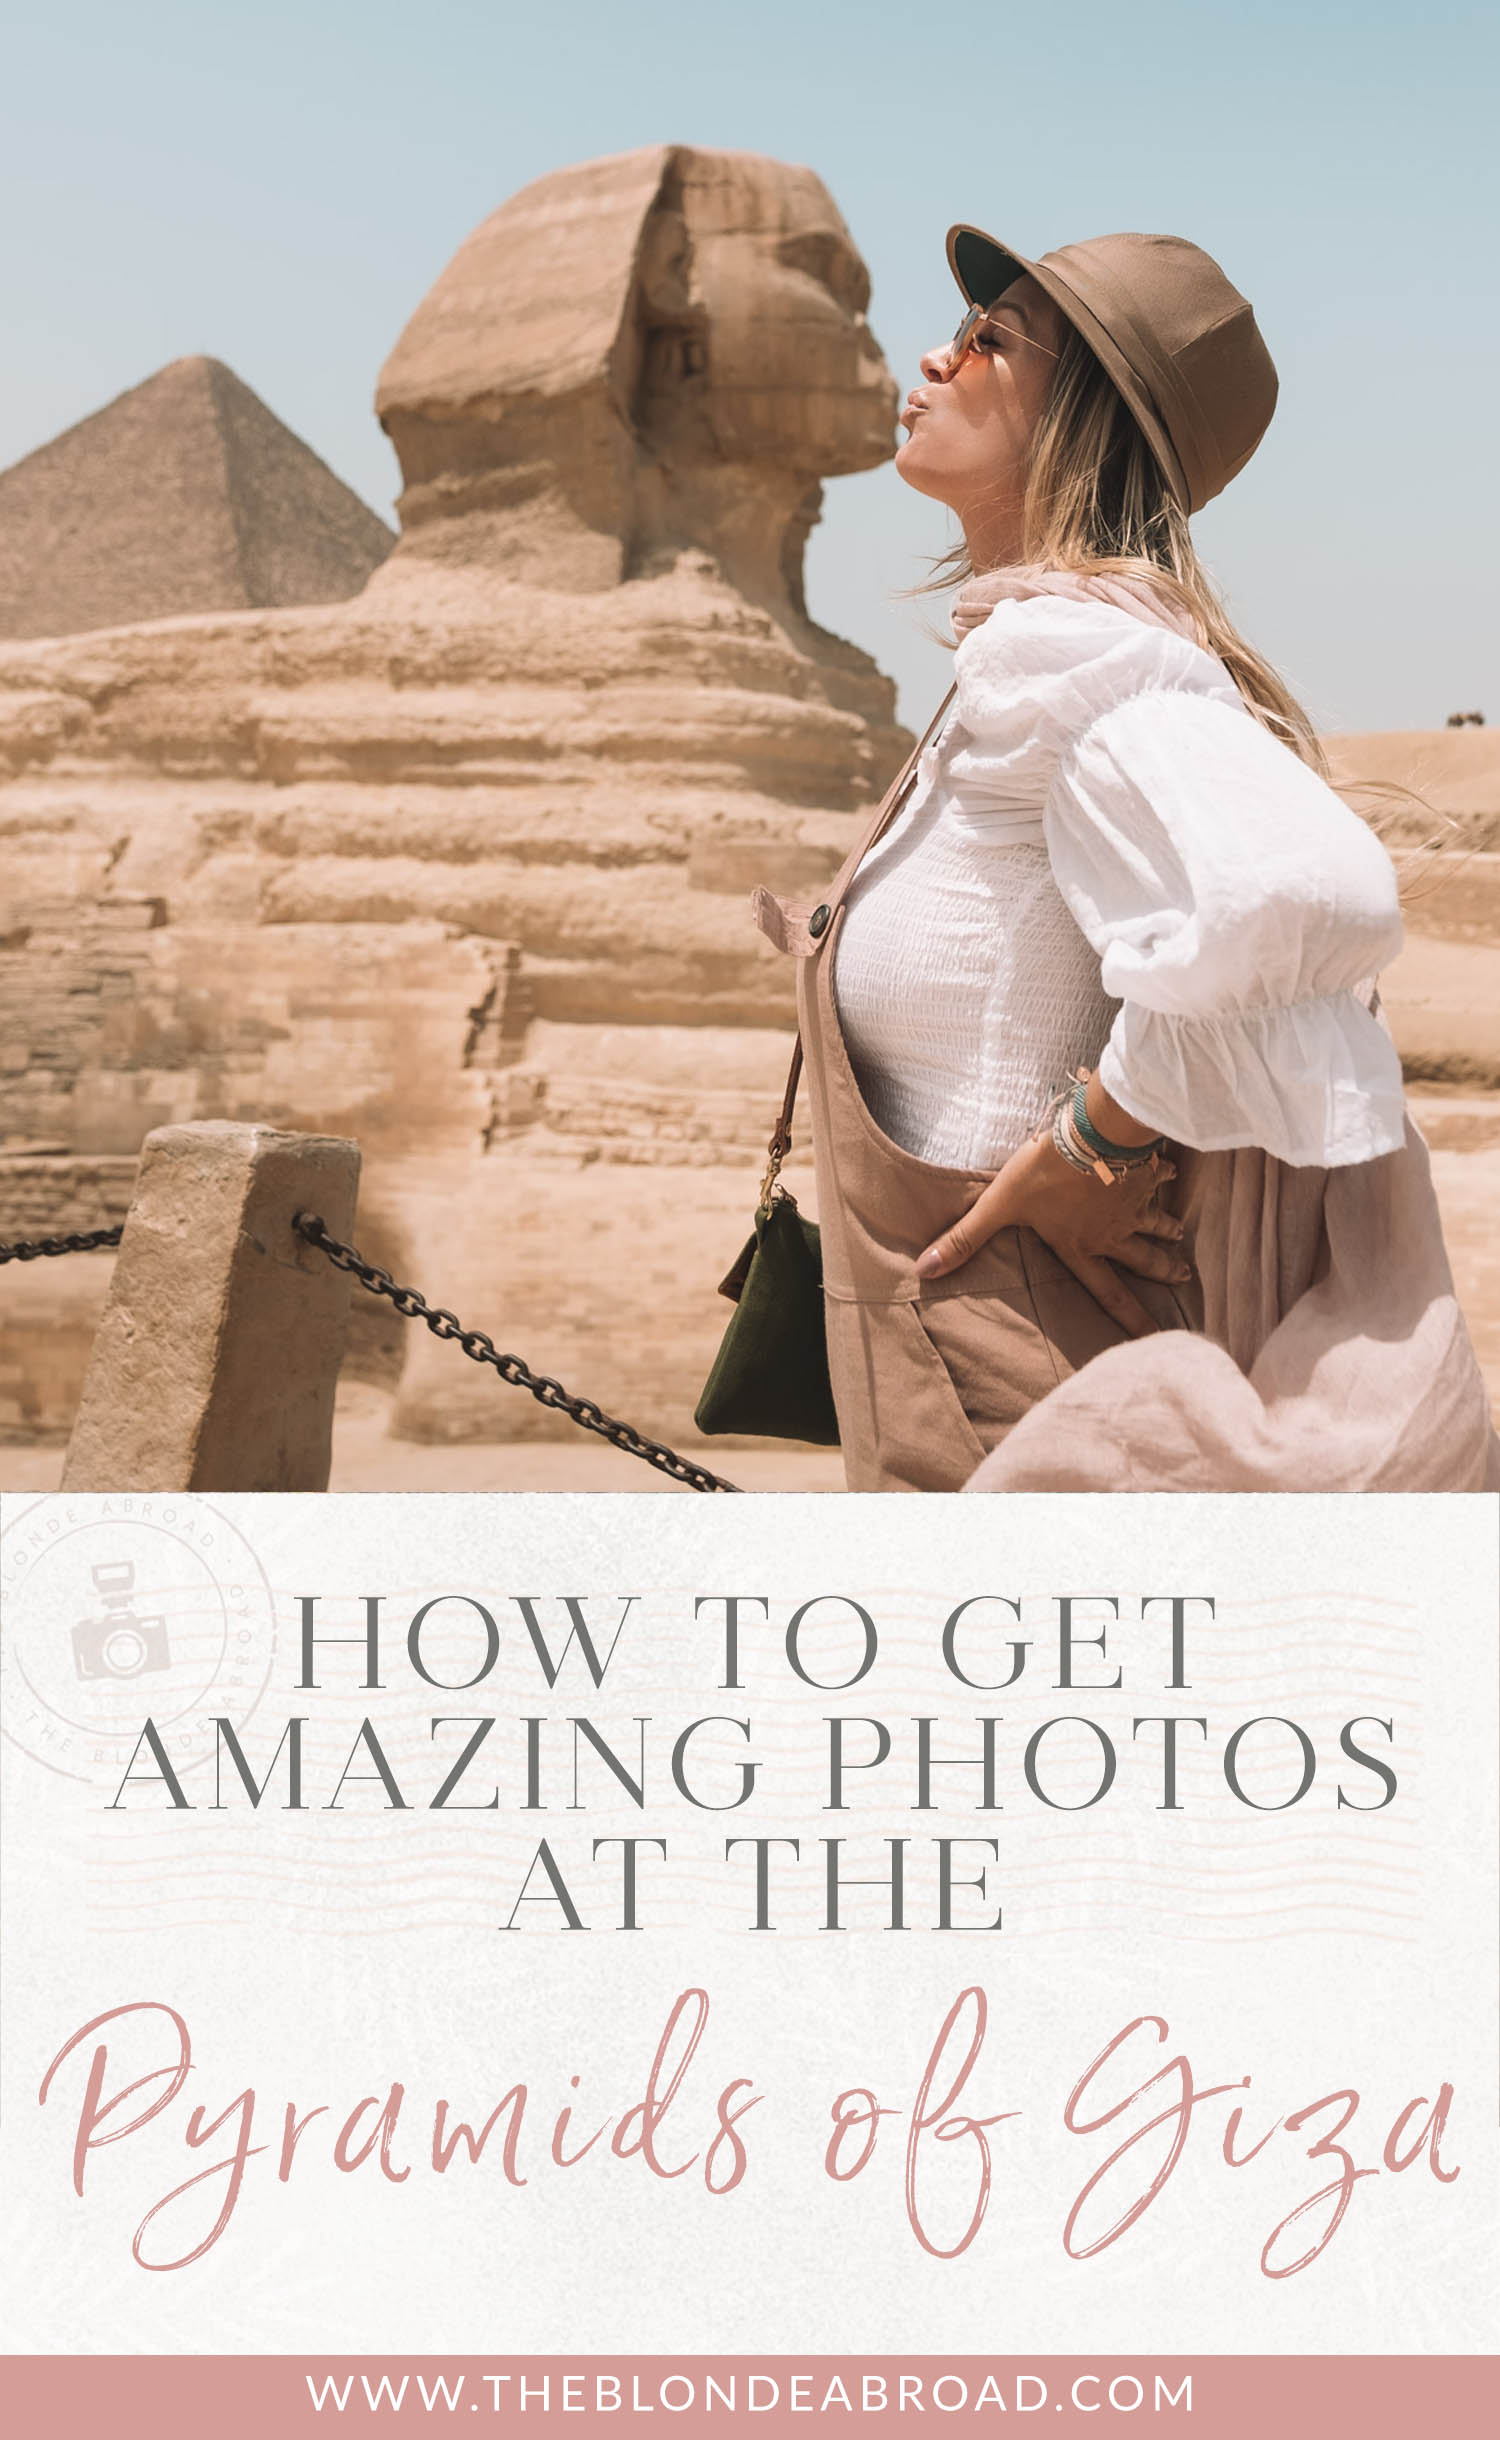 How to Get Amazing Photos at Pyramids of Giza